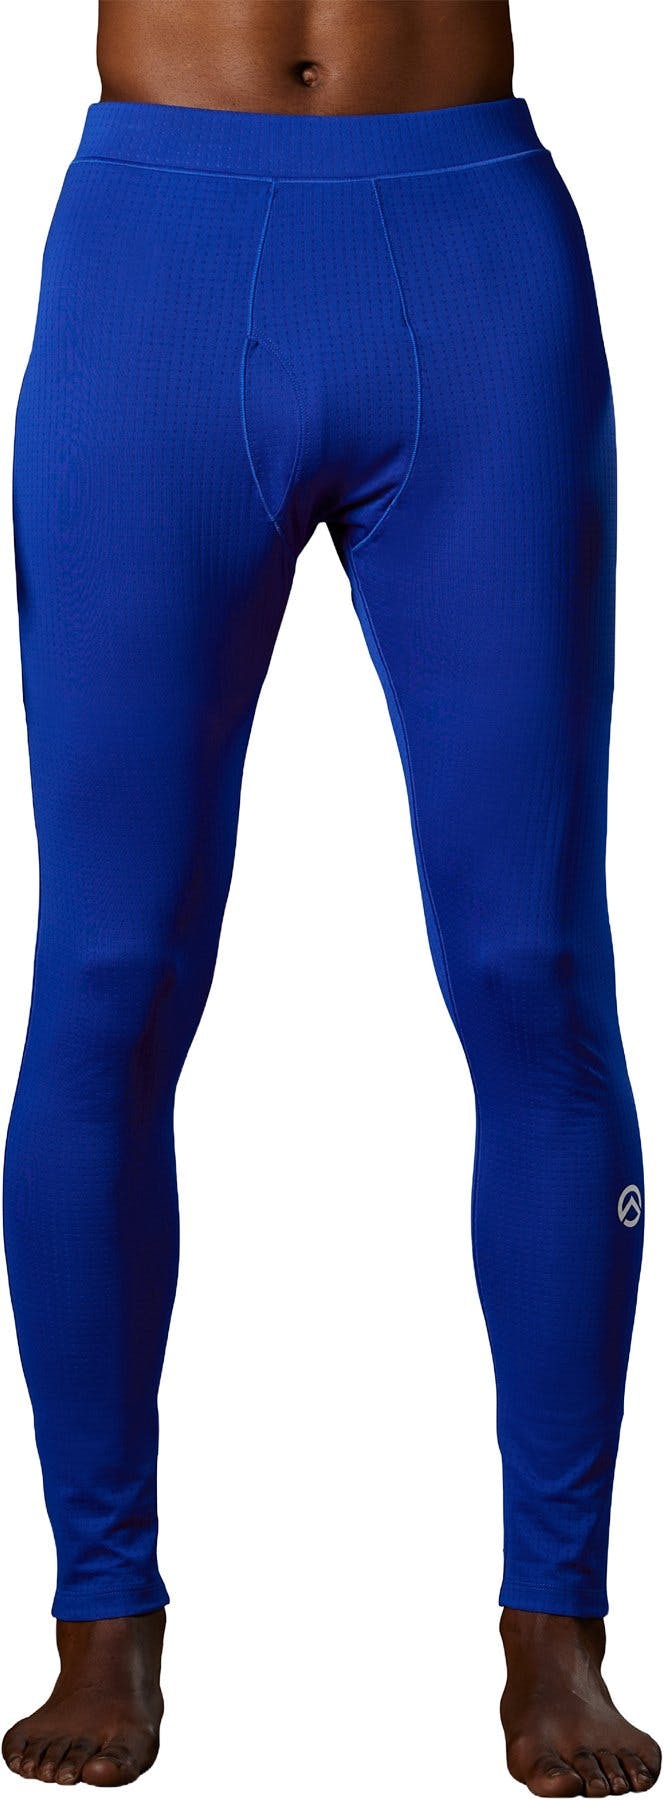 Product image for Summit Series Pro 120 Tights - Men’s